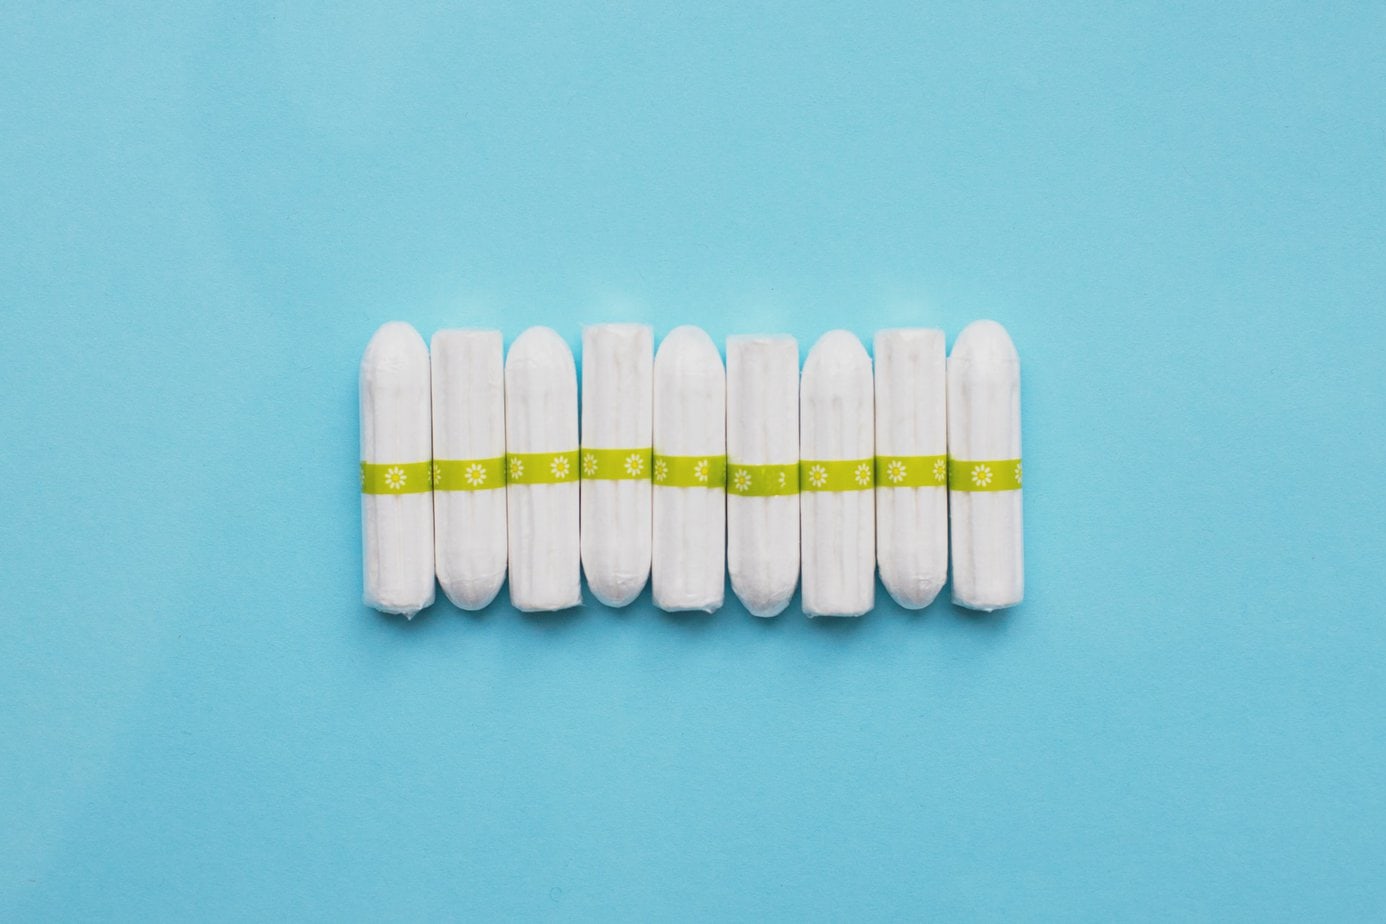 Is the use of tampons unhealthy?